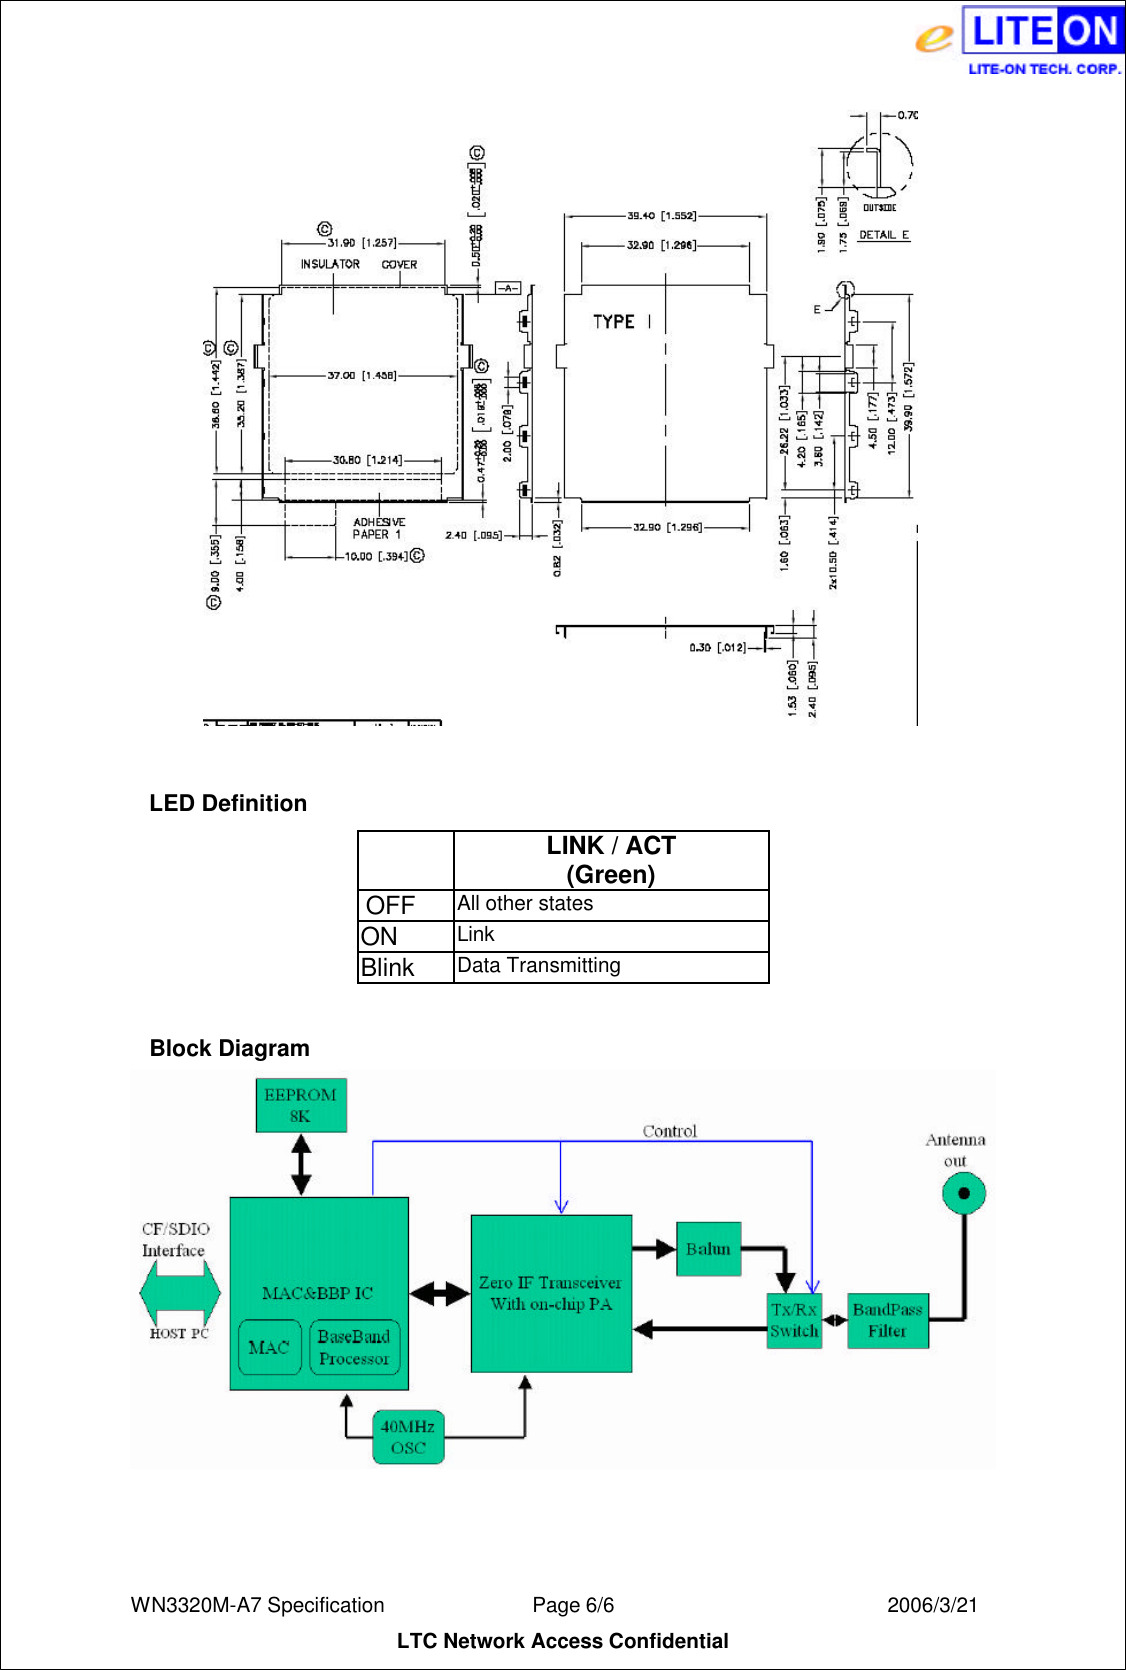  WN3320M-A7 Specification               Page 6/6                          2006/3/21 LTC Network Access Confidential   LED Definition  LINK / ACT (Green) OFF All other states ON Link Blink Data Transmitting  Block Diagram    